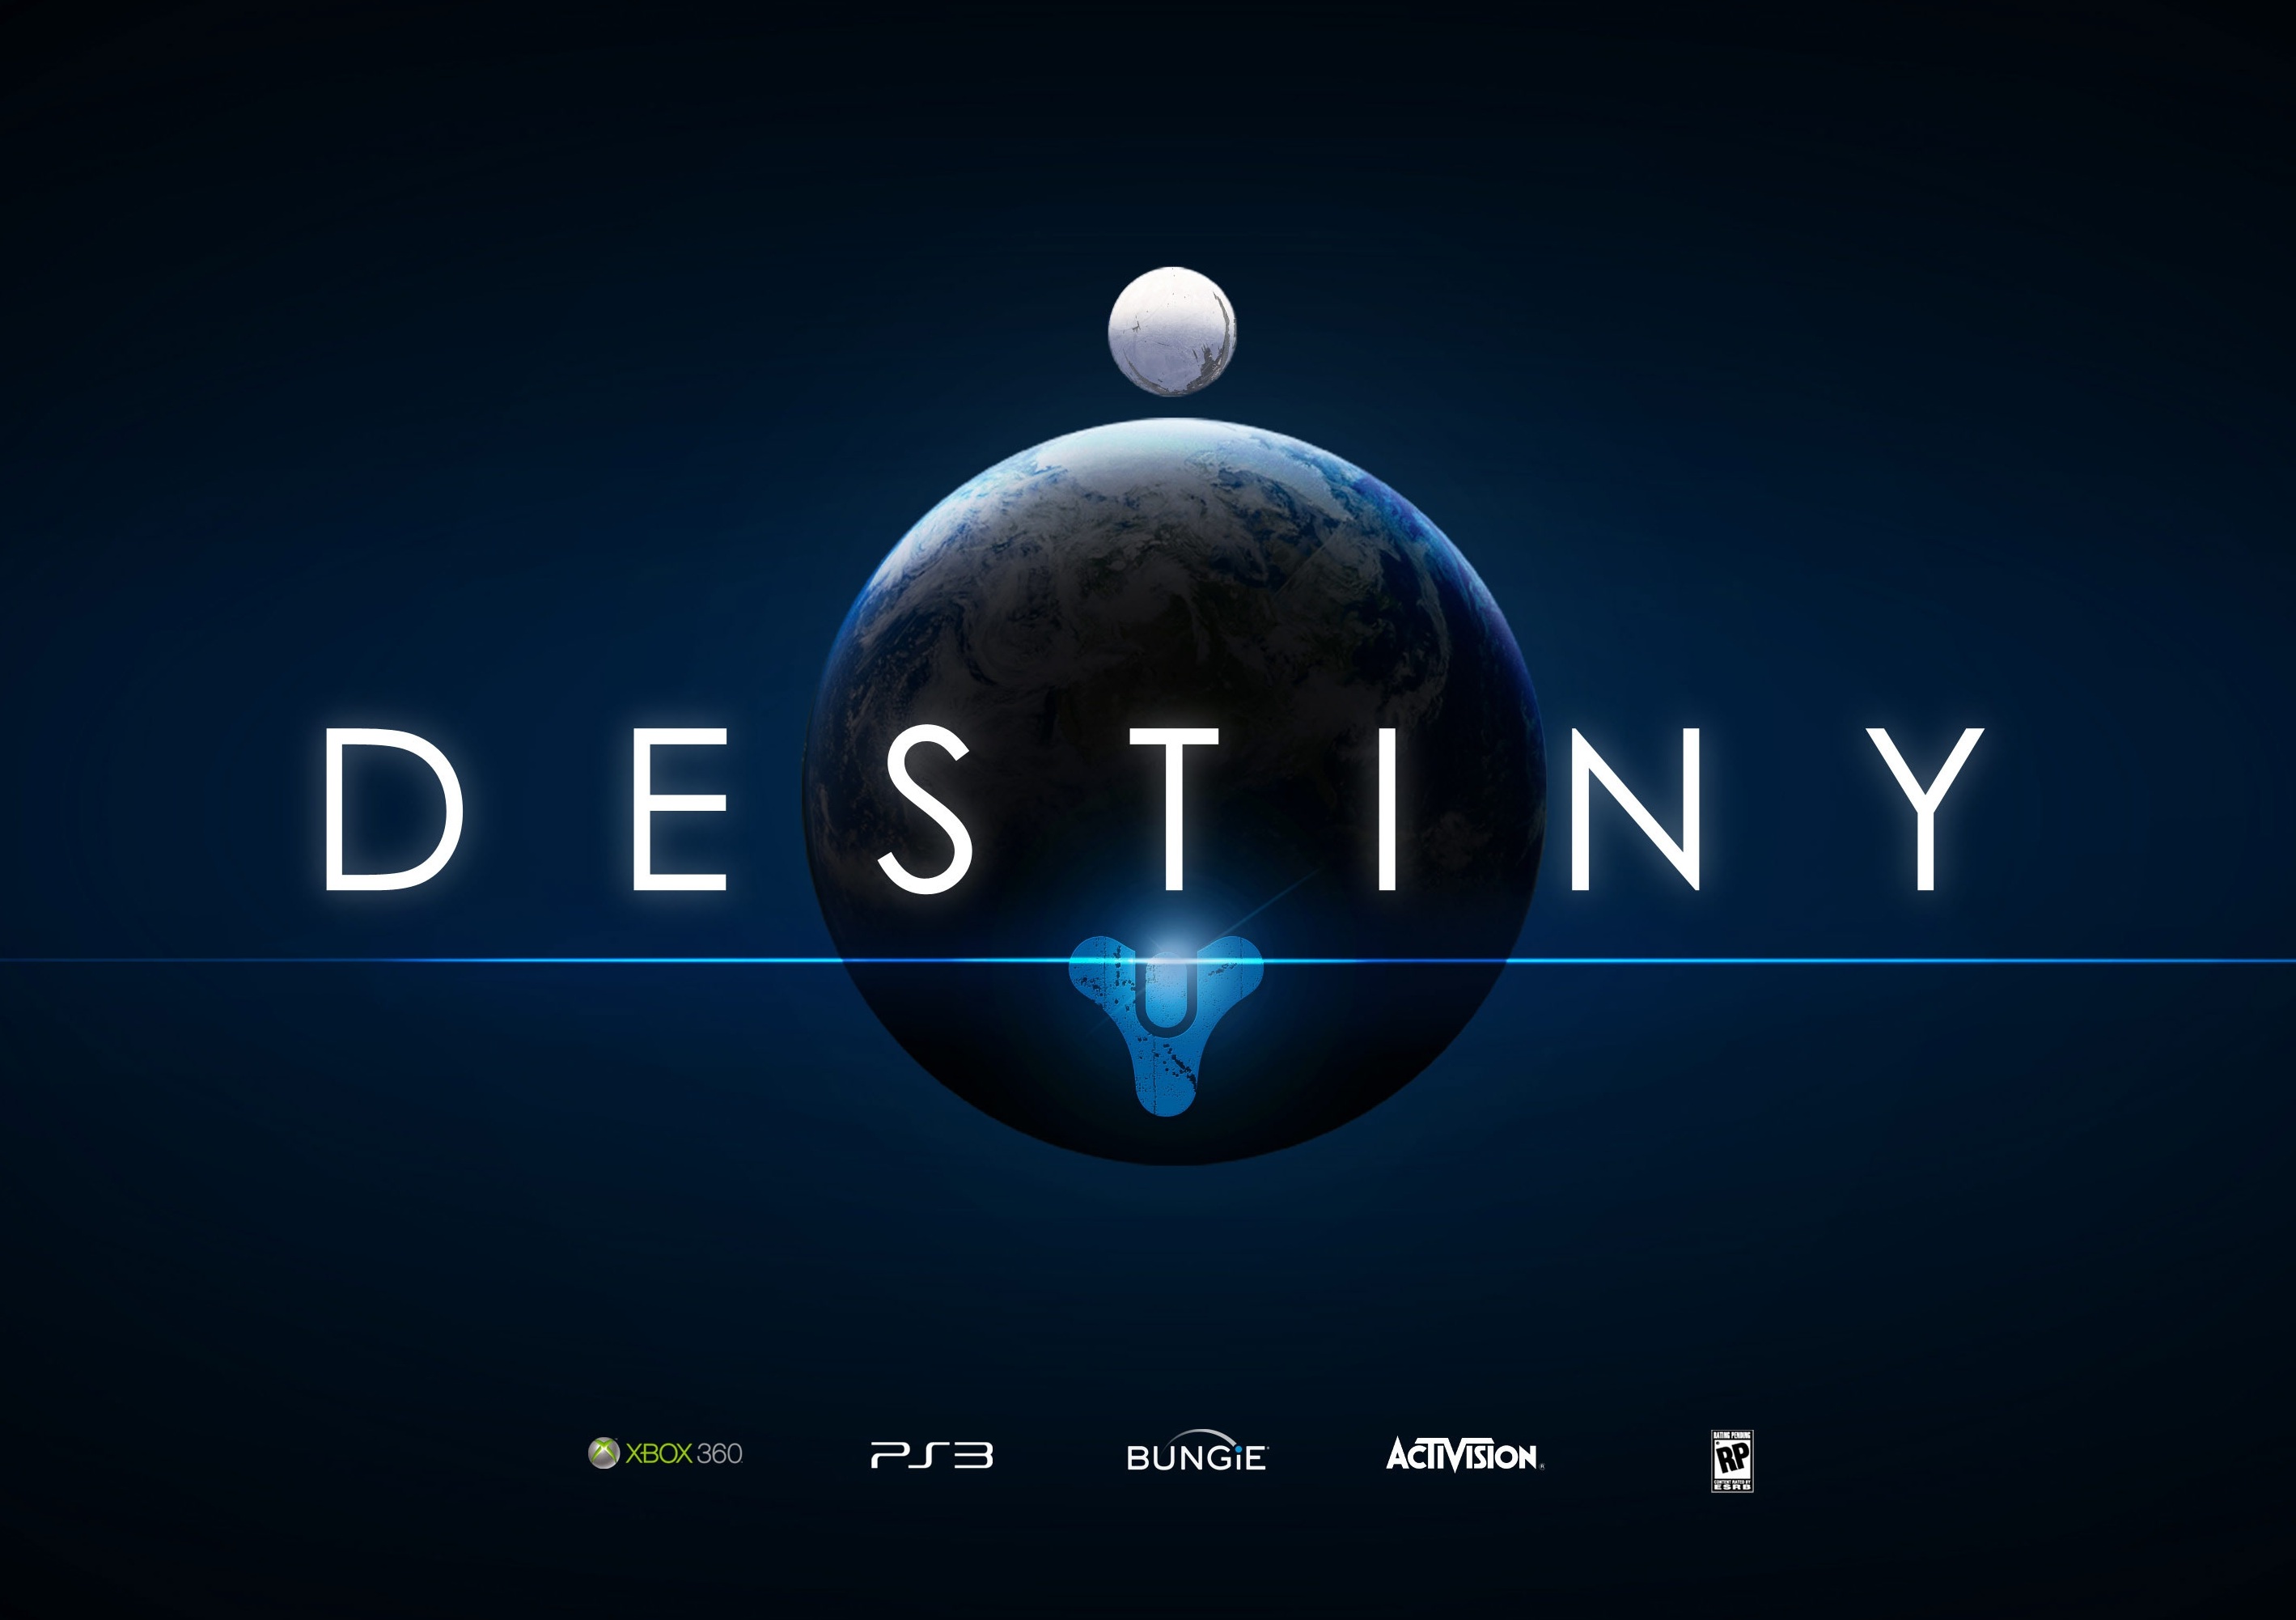 Bungies Destiny coming to PS3 story leaked with new images 2838x2002